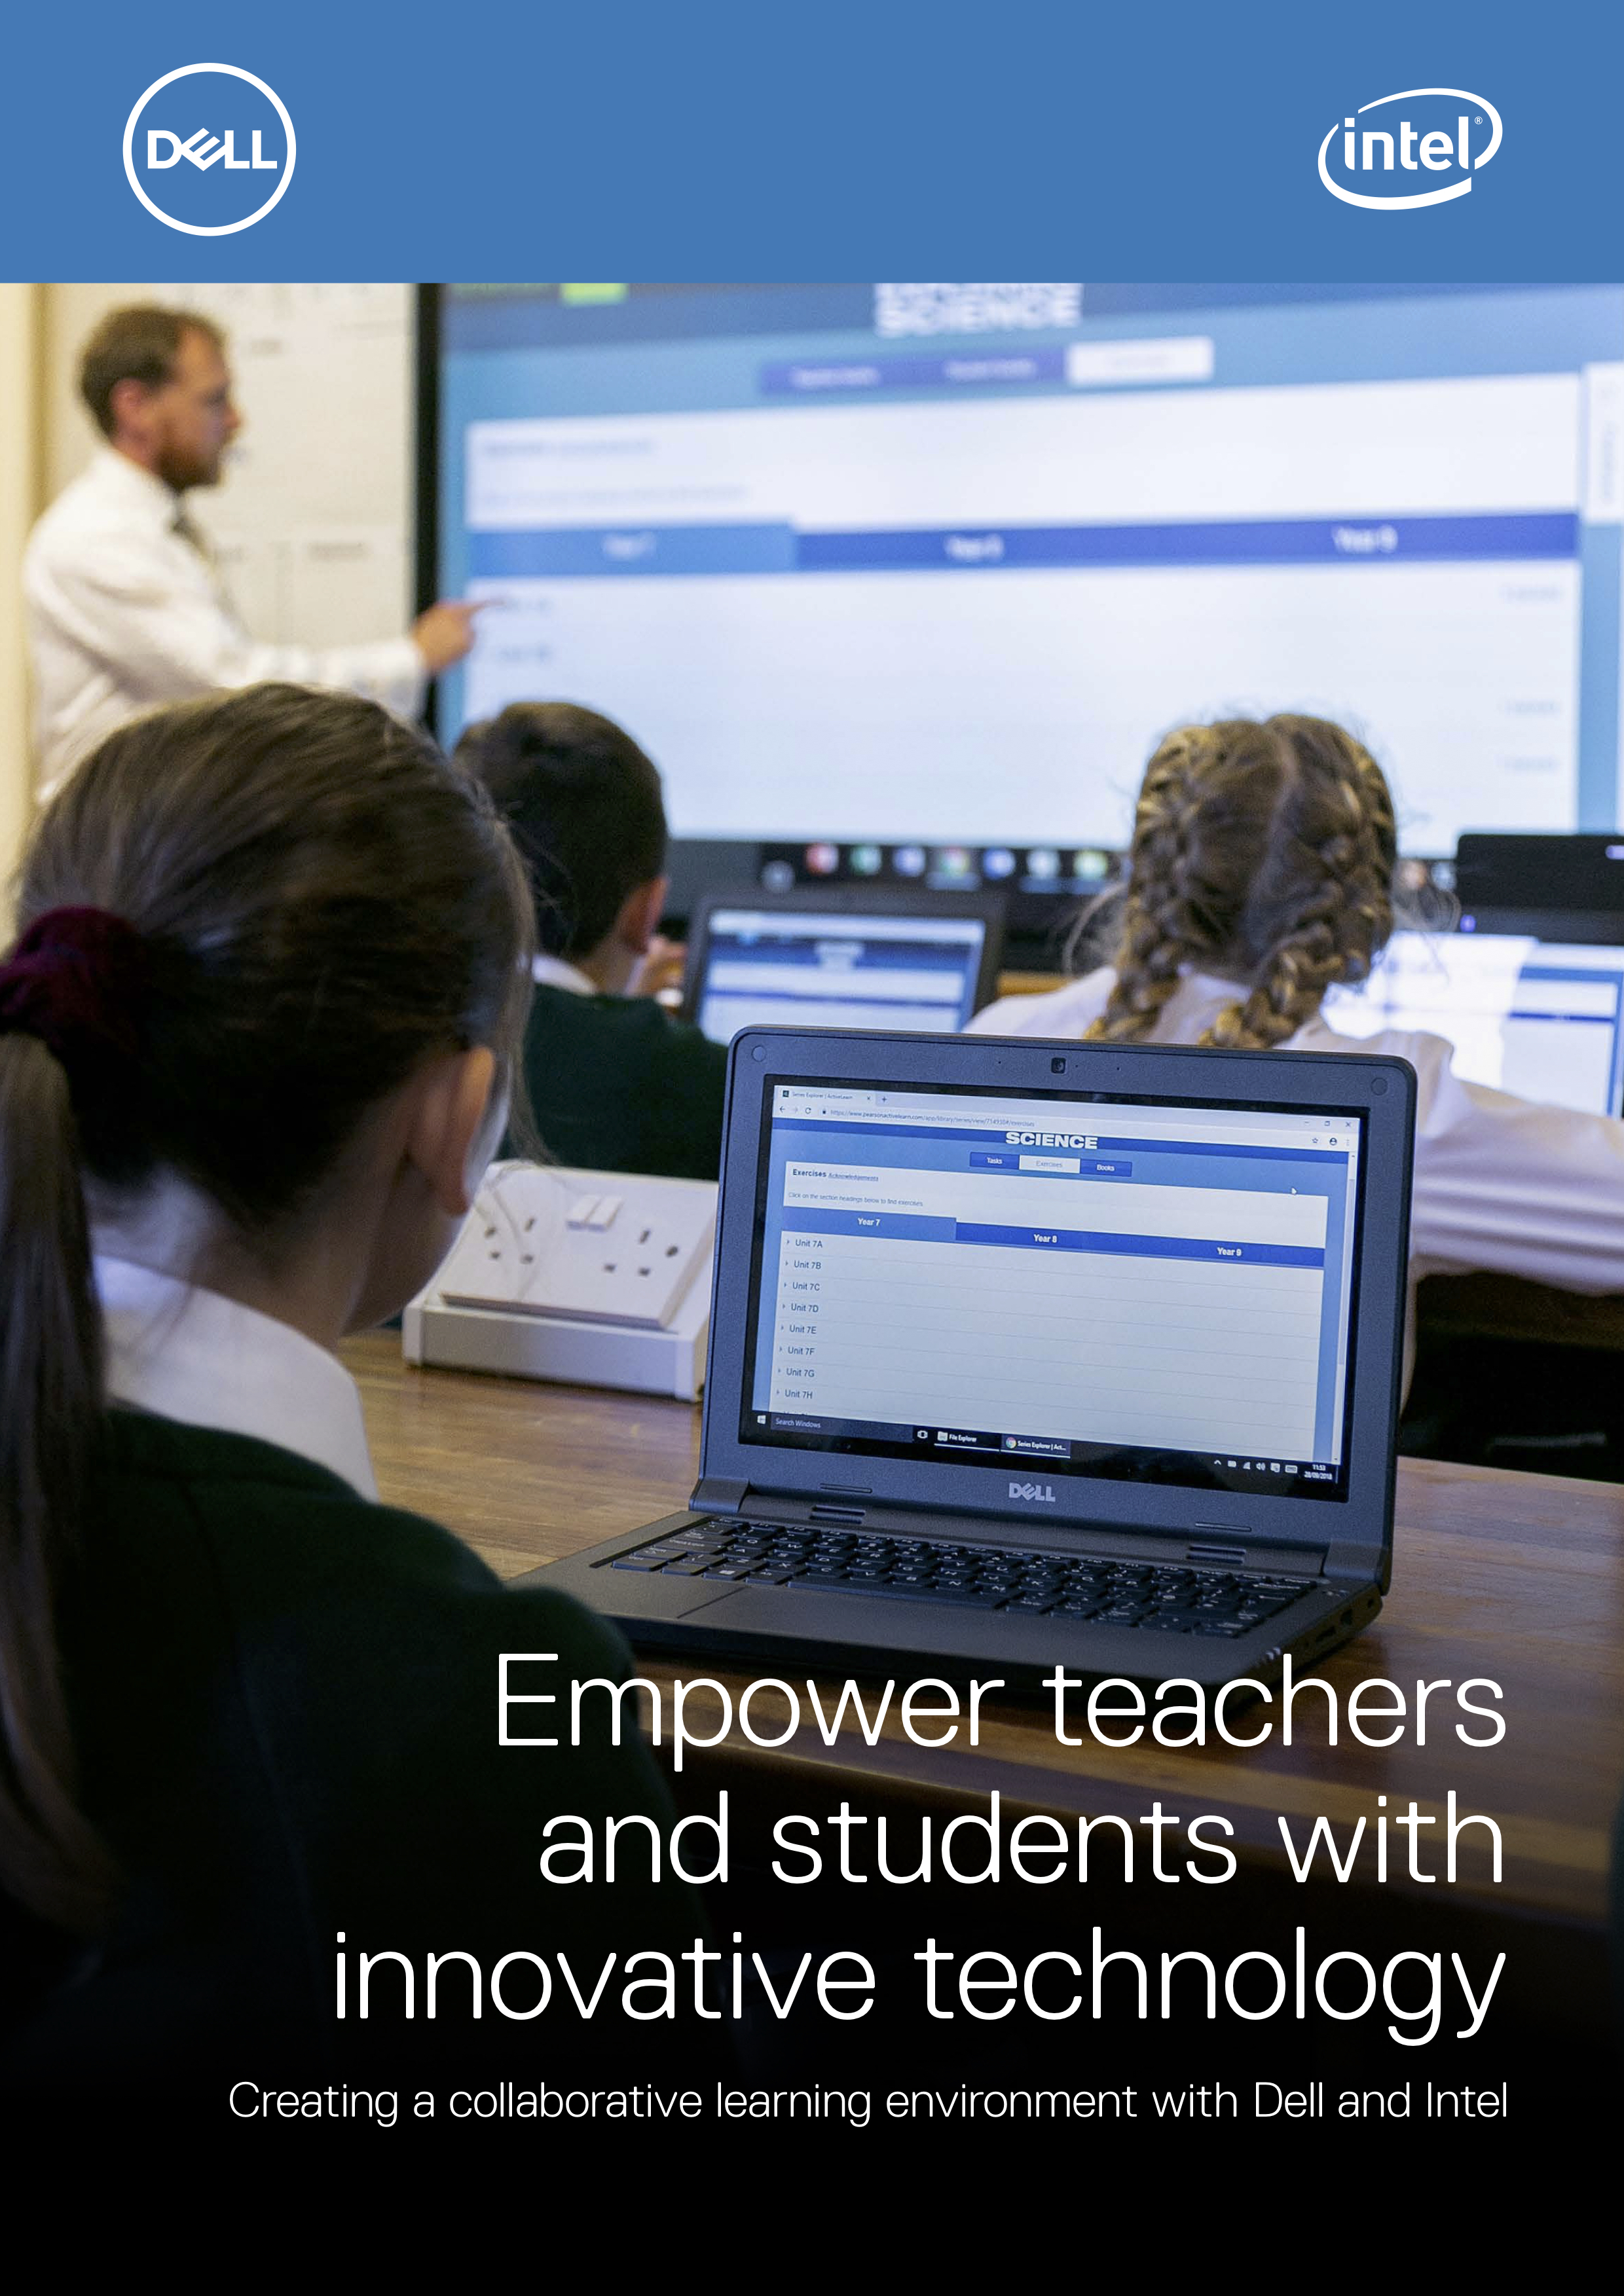 Creating a collaborative learning environment with Dell and Intel